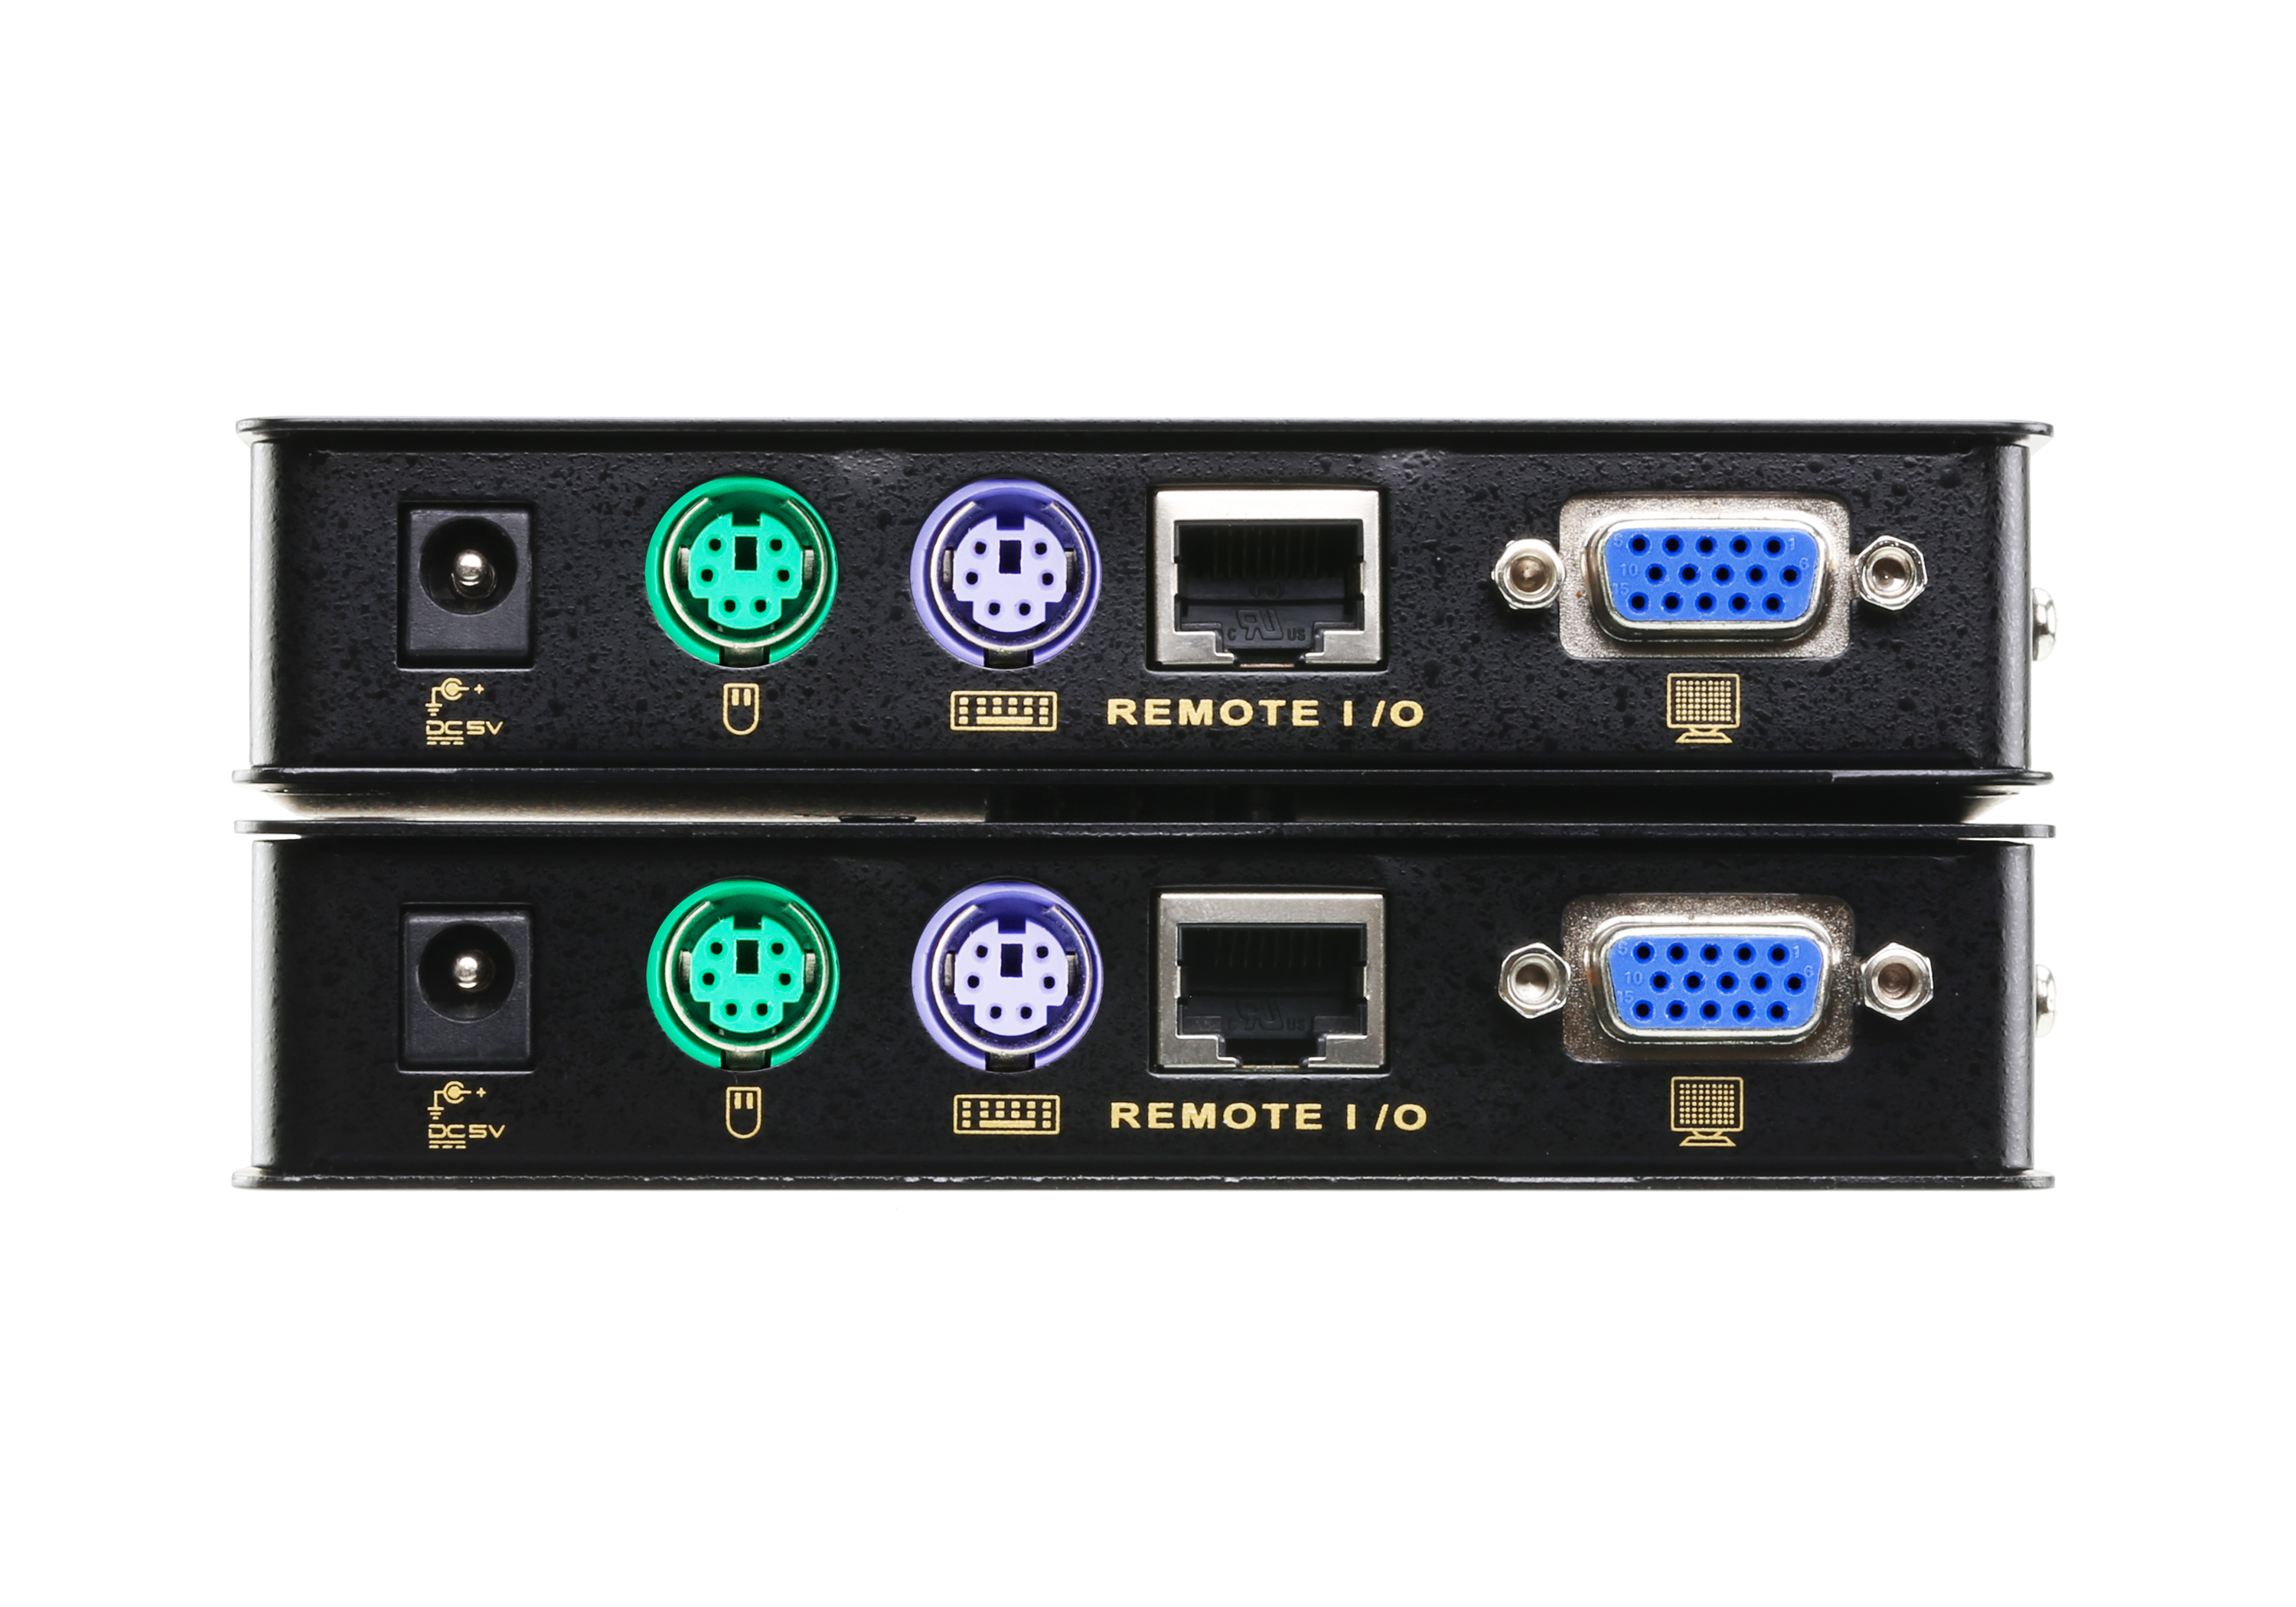 ATEN CE 250A Local and Remote Units - KVM-Extender